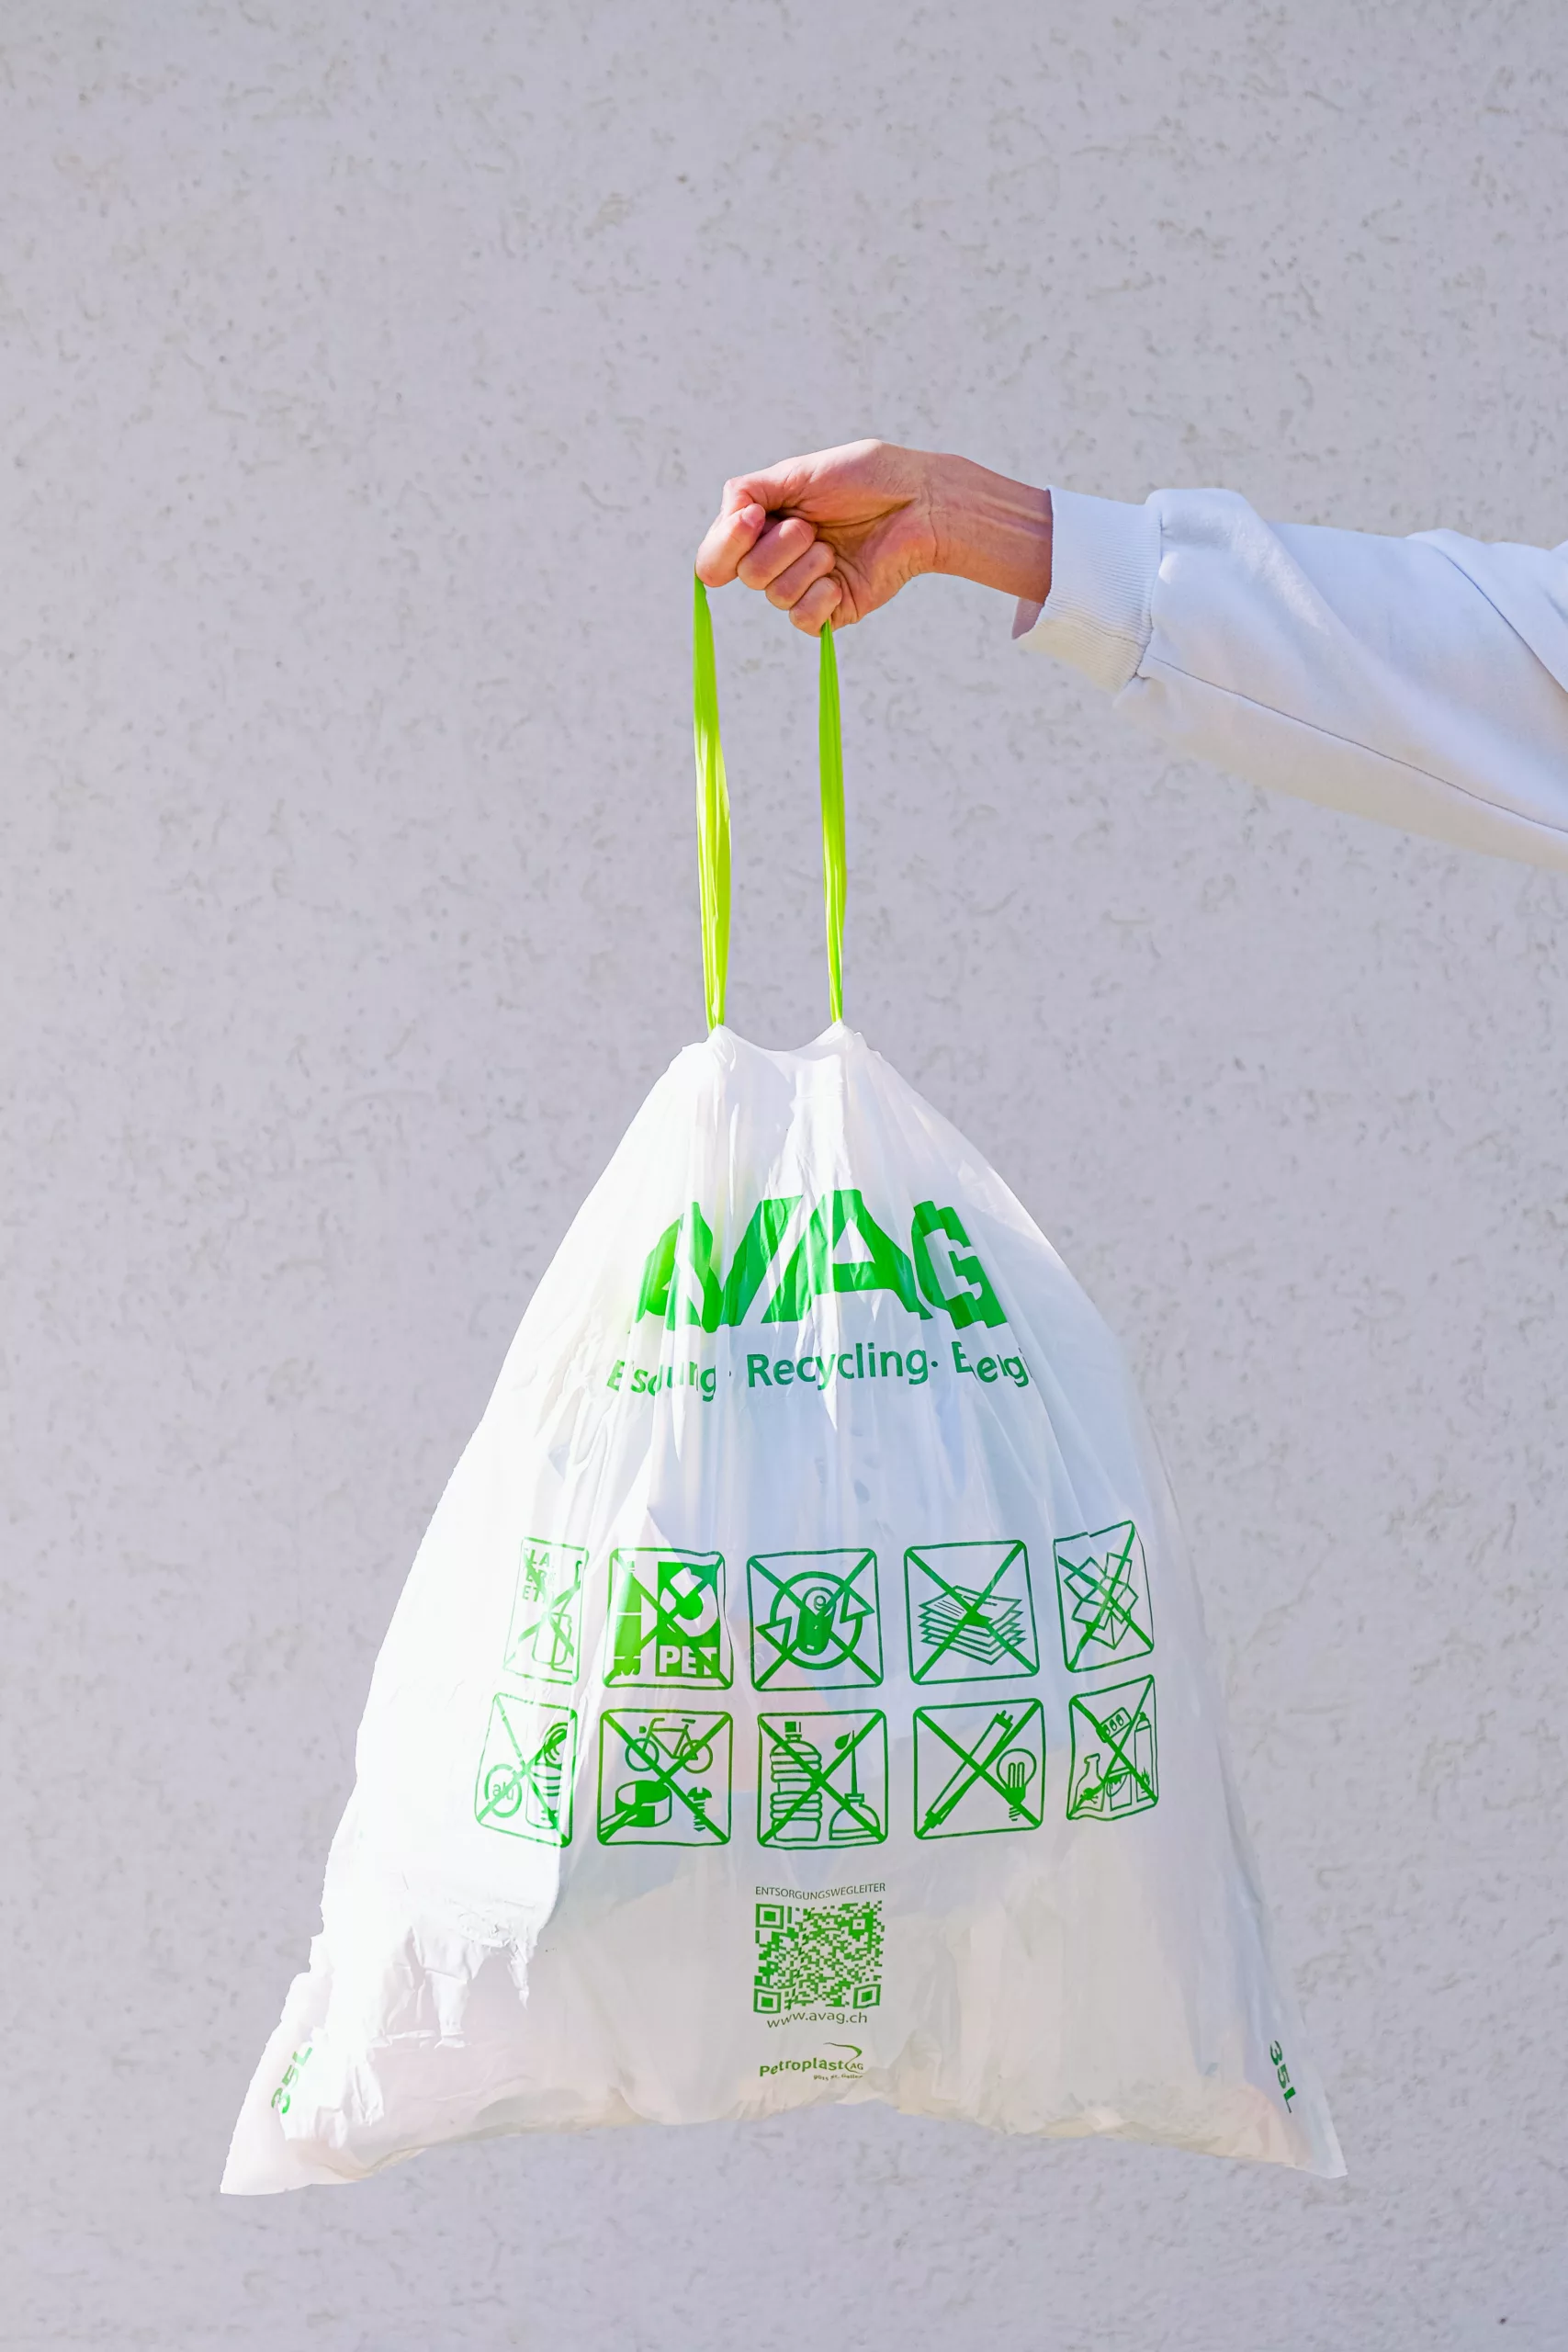 Compostable Garbage Bags